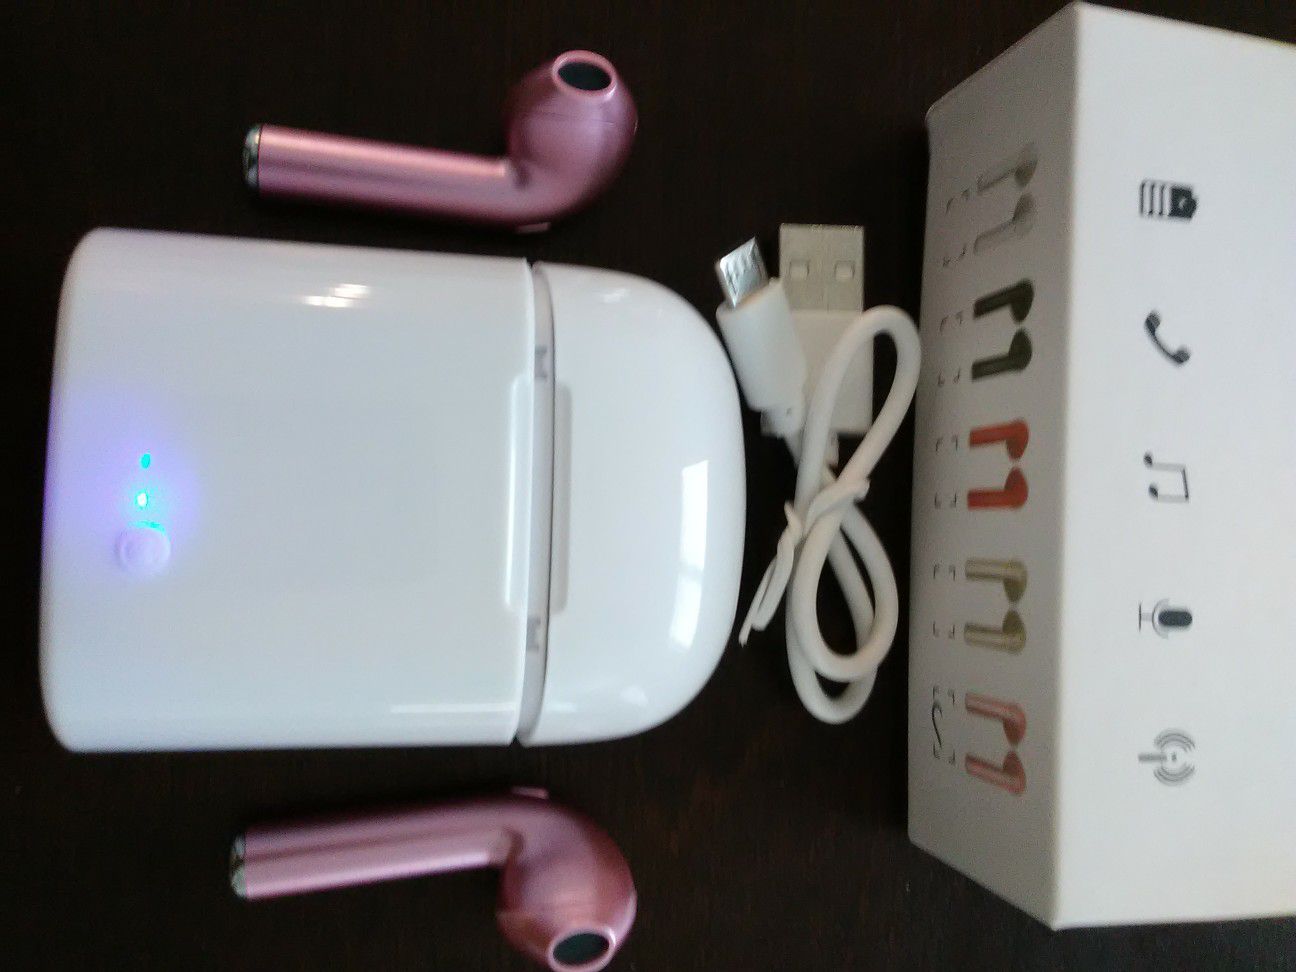 Brand new pink wireless Bluetooth headphones earbuds with wireless charger box included. These are not airpods